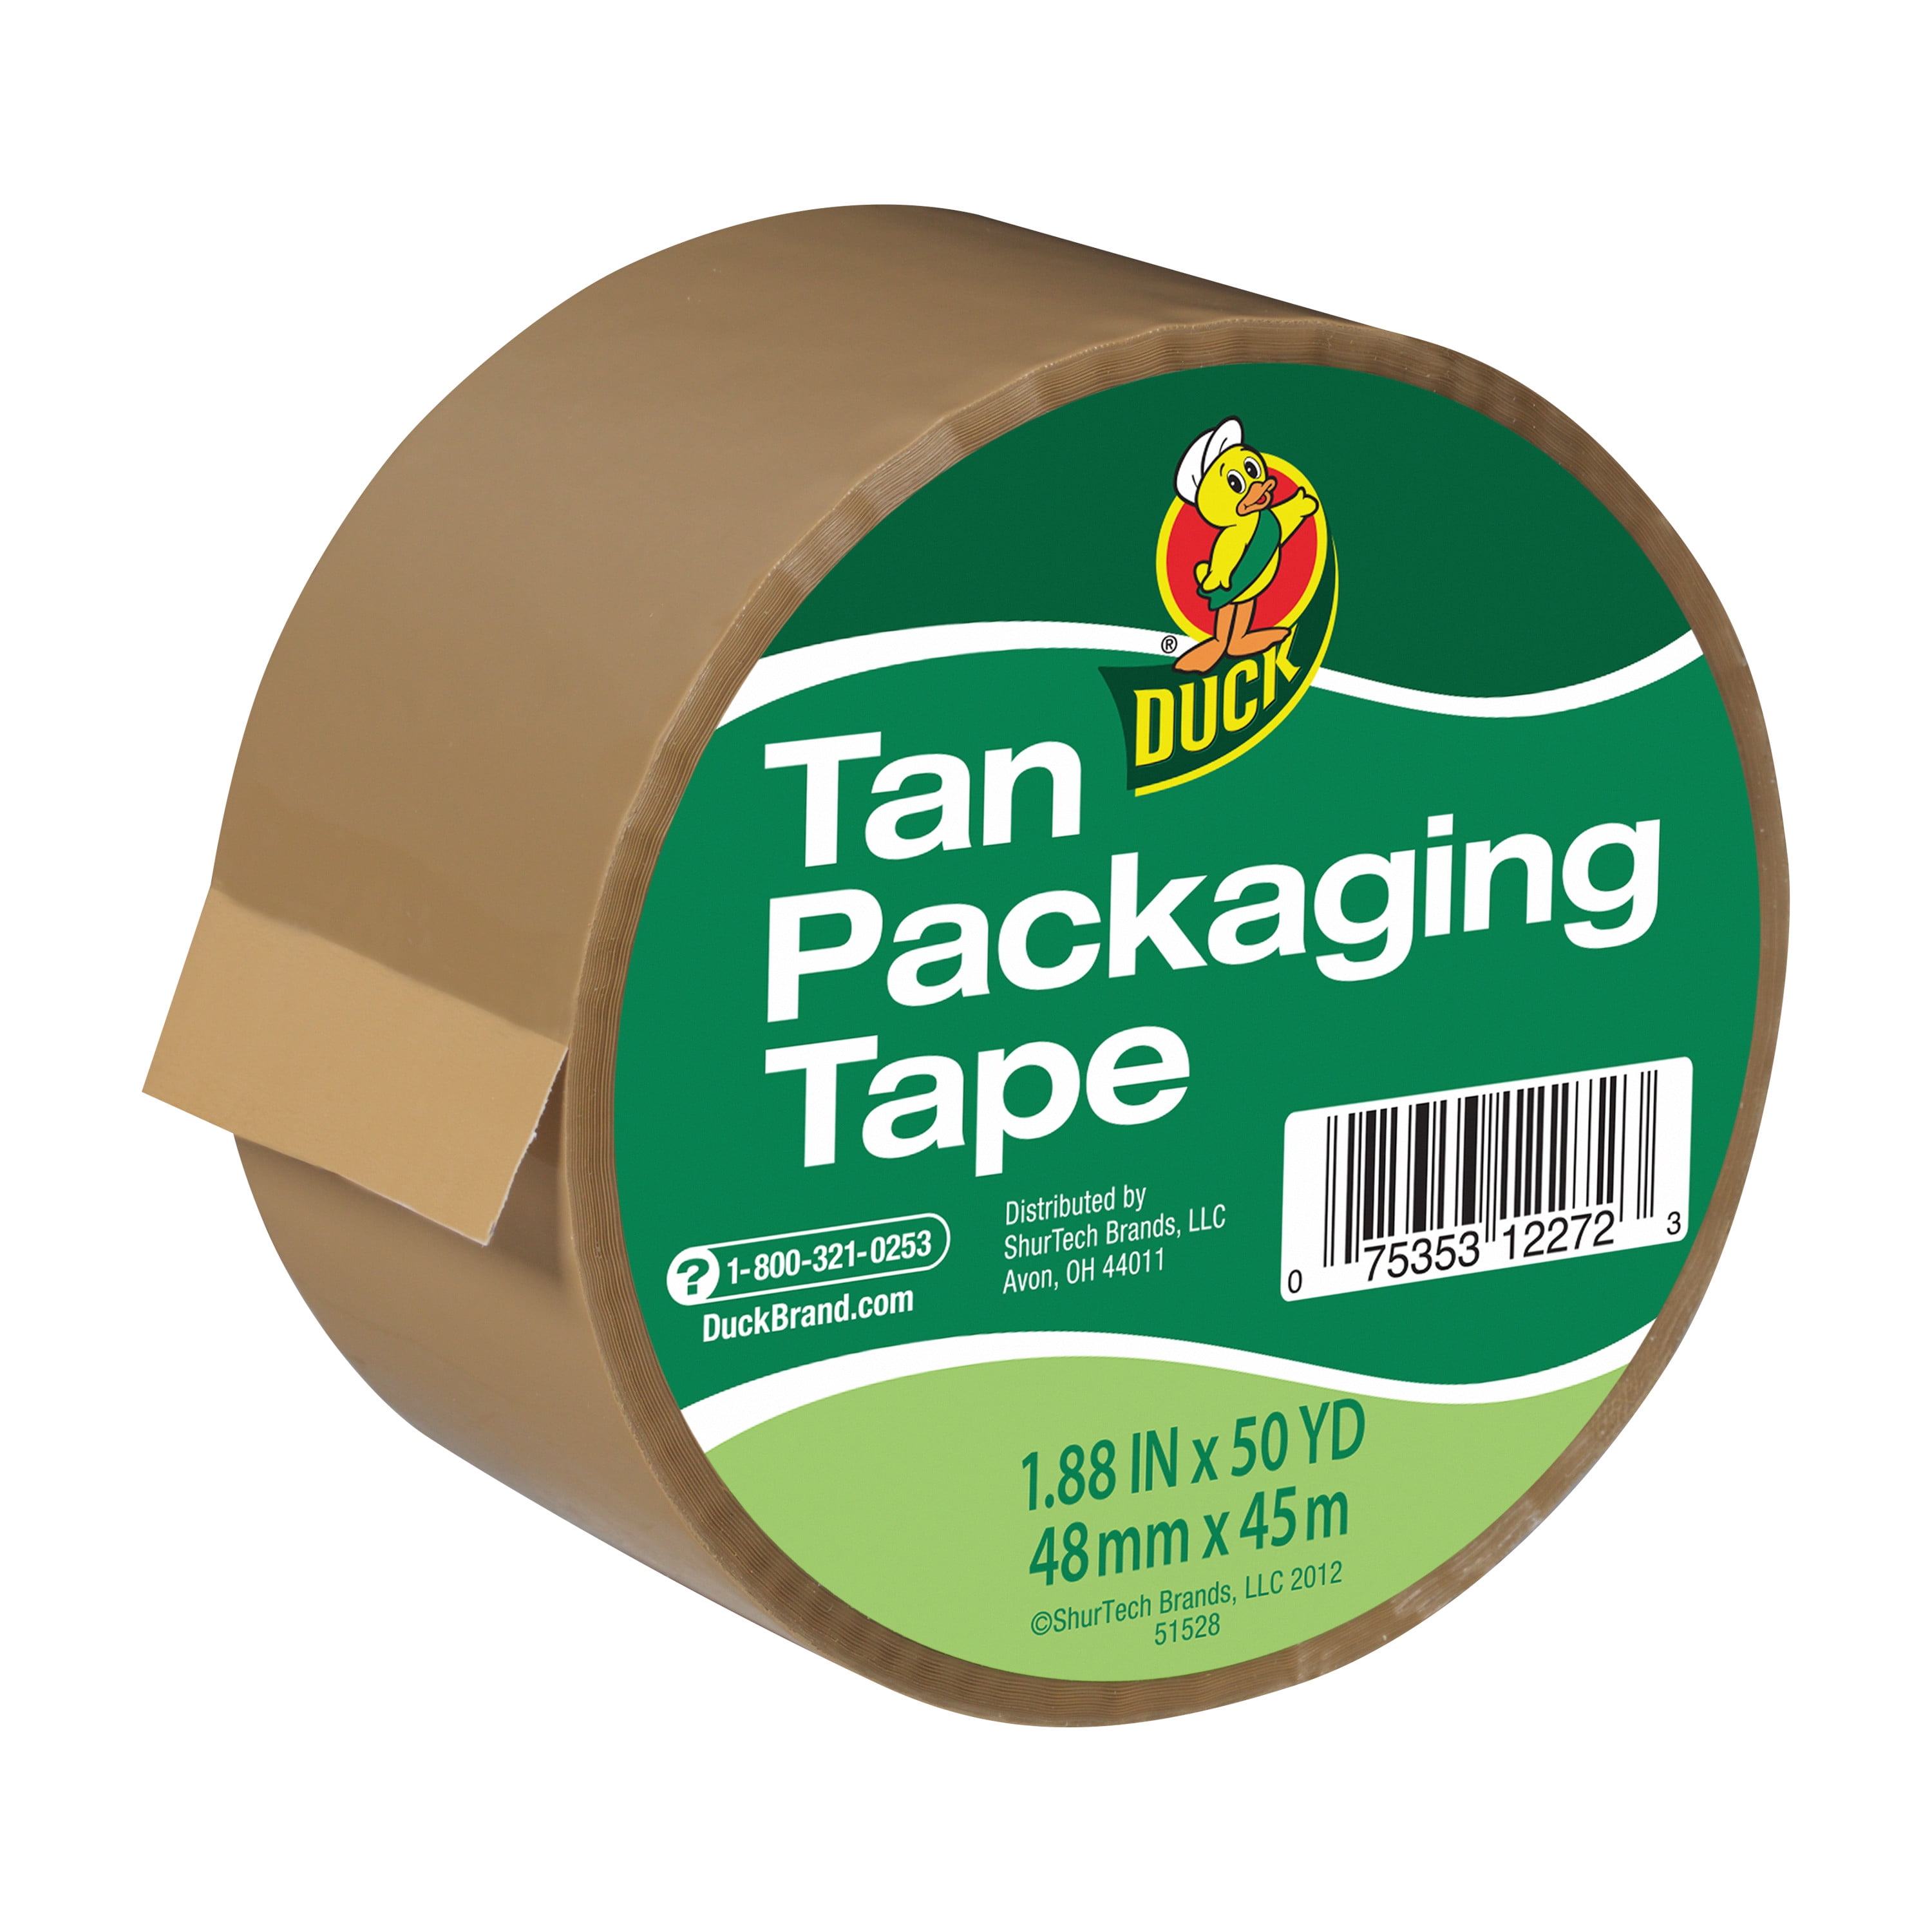 Duck Standard Acrylic Packing Tape, 1.88 in x 50 yd, Tan